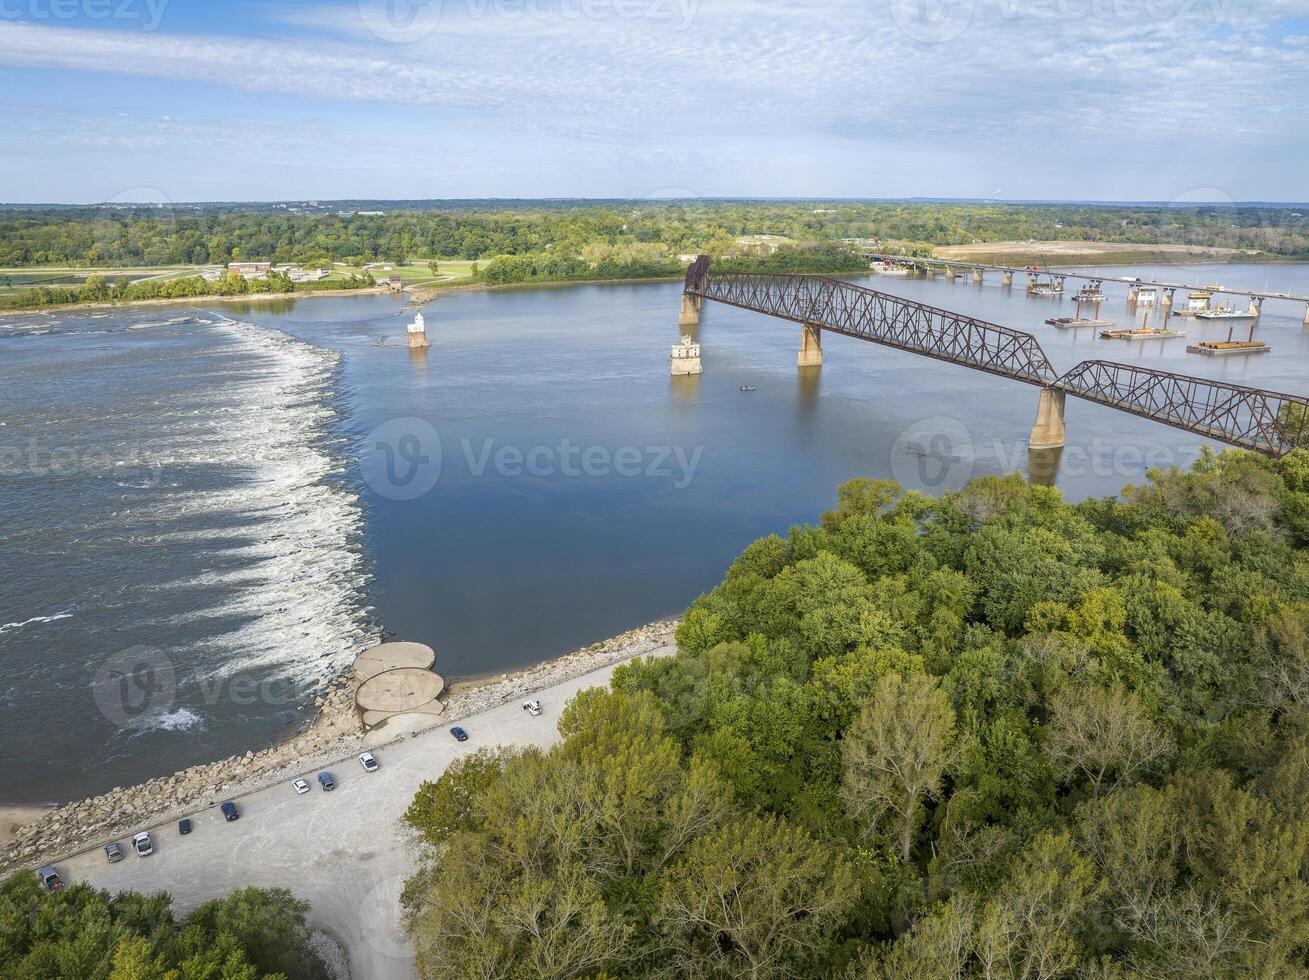 Chain of Rocks on the Mississippi RIver above St Louis with the Low Water Dam, water towers, old historic bridge and the new bridge with construction work photo